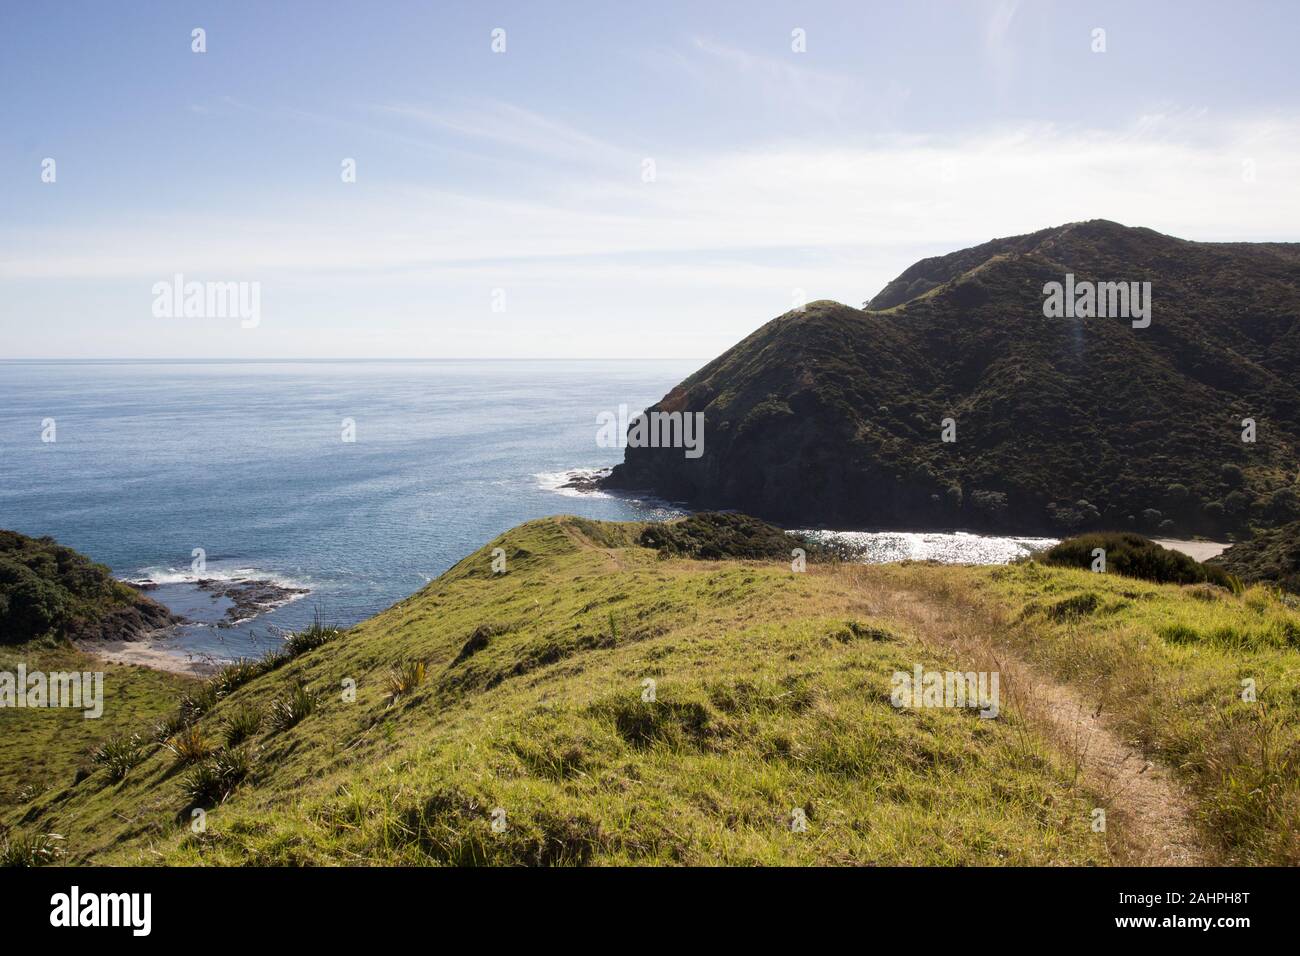 Morning view of the mountains and ocean from the Te Paki Coastal Track in Northland, New Zealand. Stock Photo